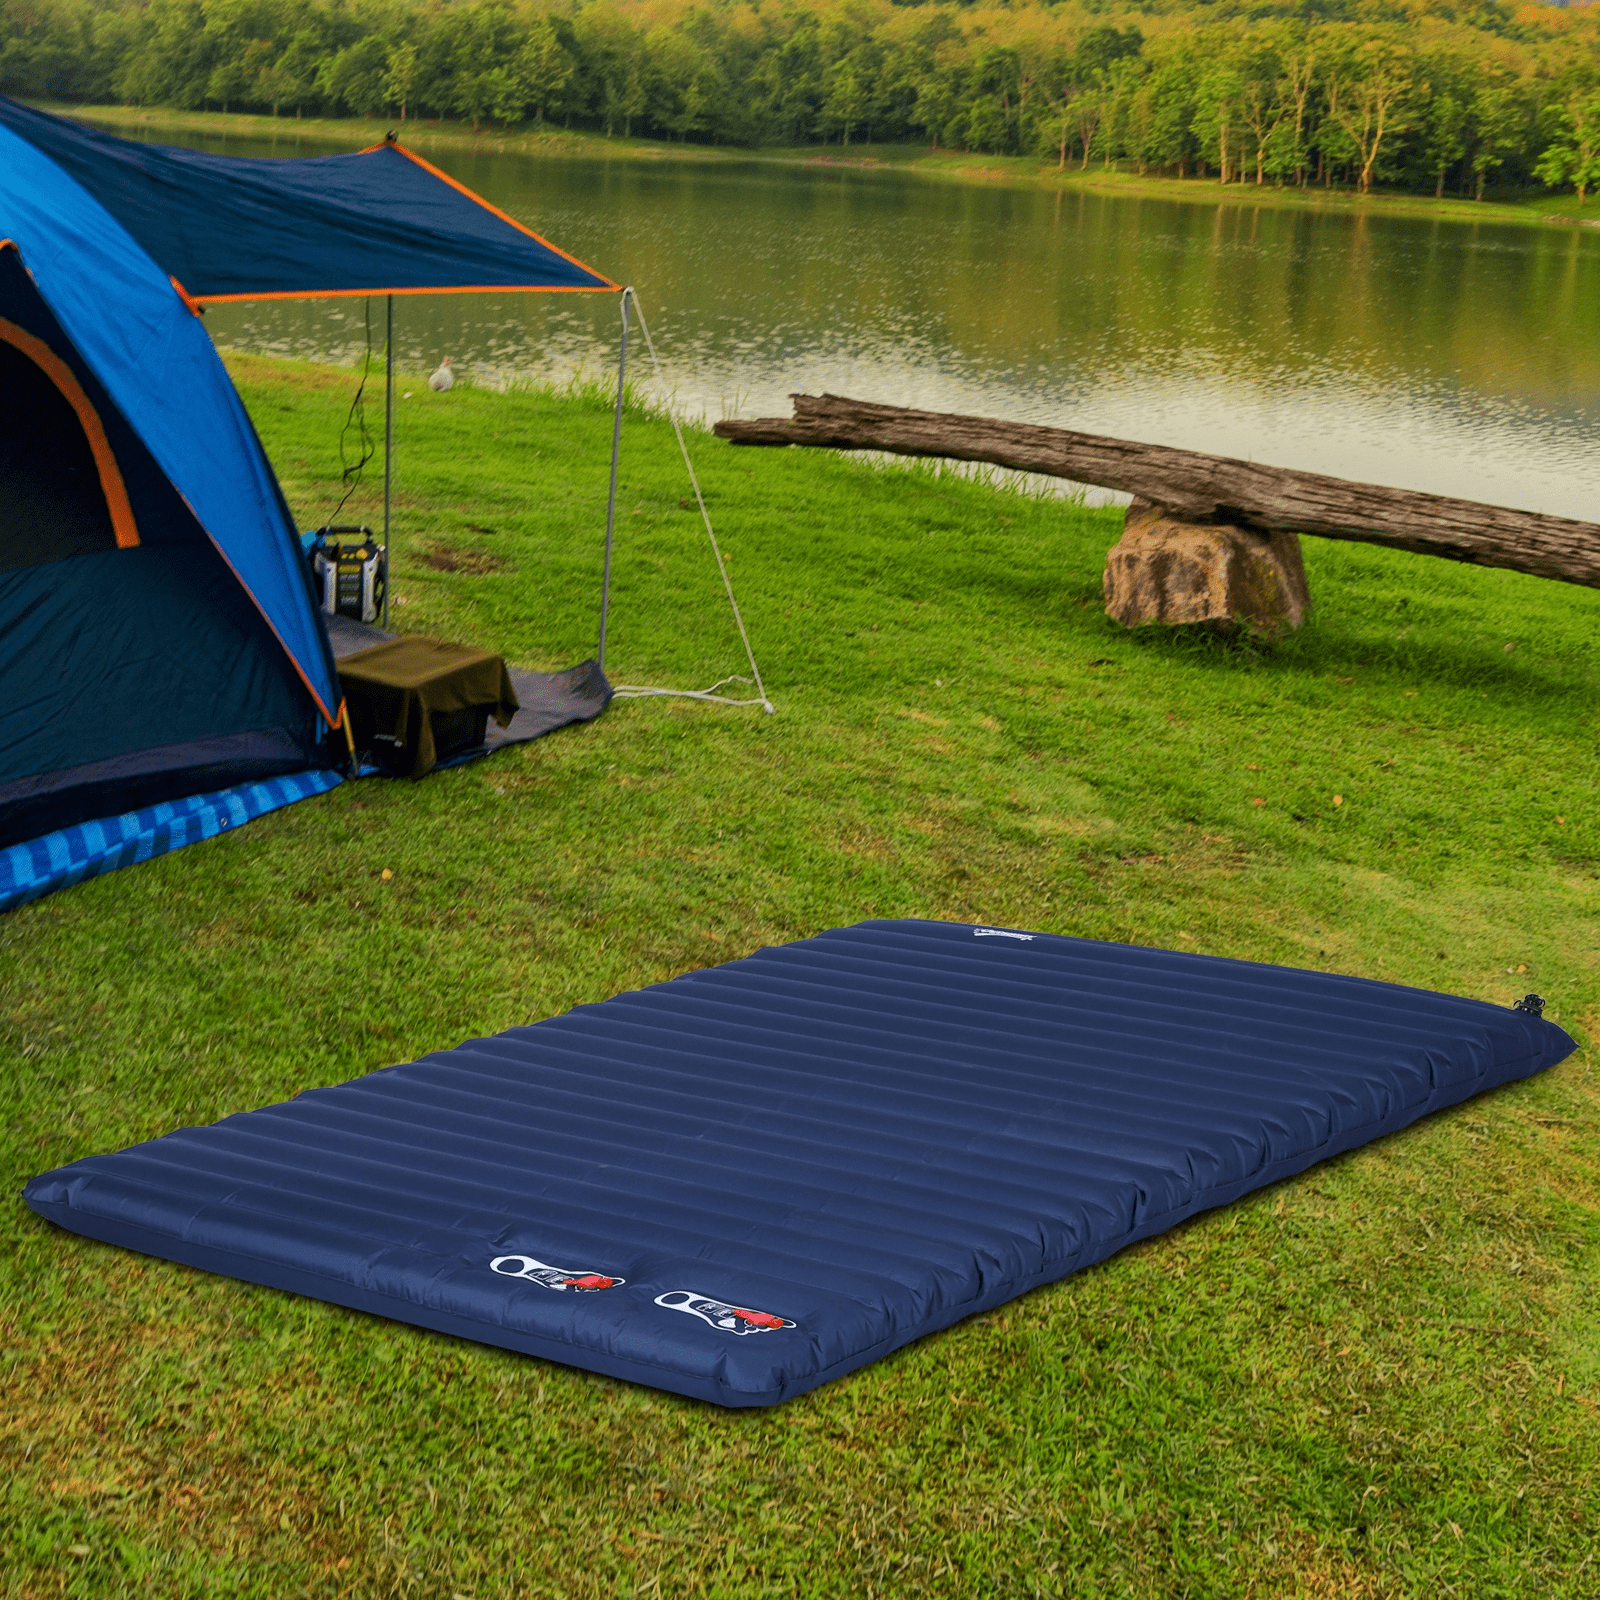 Outsunny 2 Person Camping Inflating Sleeping Mat Sleeping Mats and Airbeds Cosy Camping Co.   